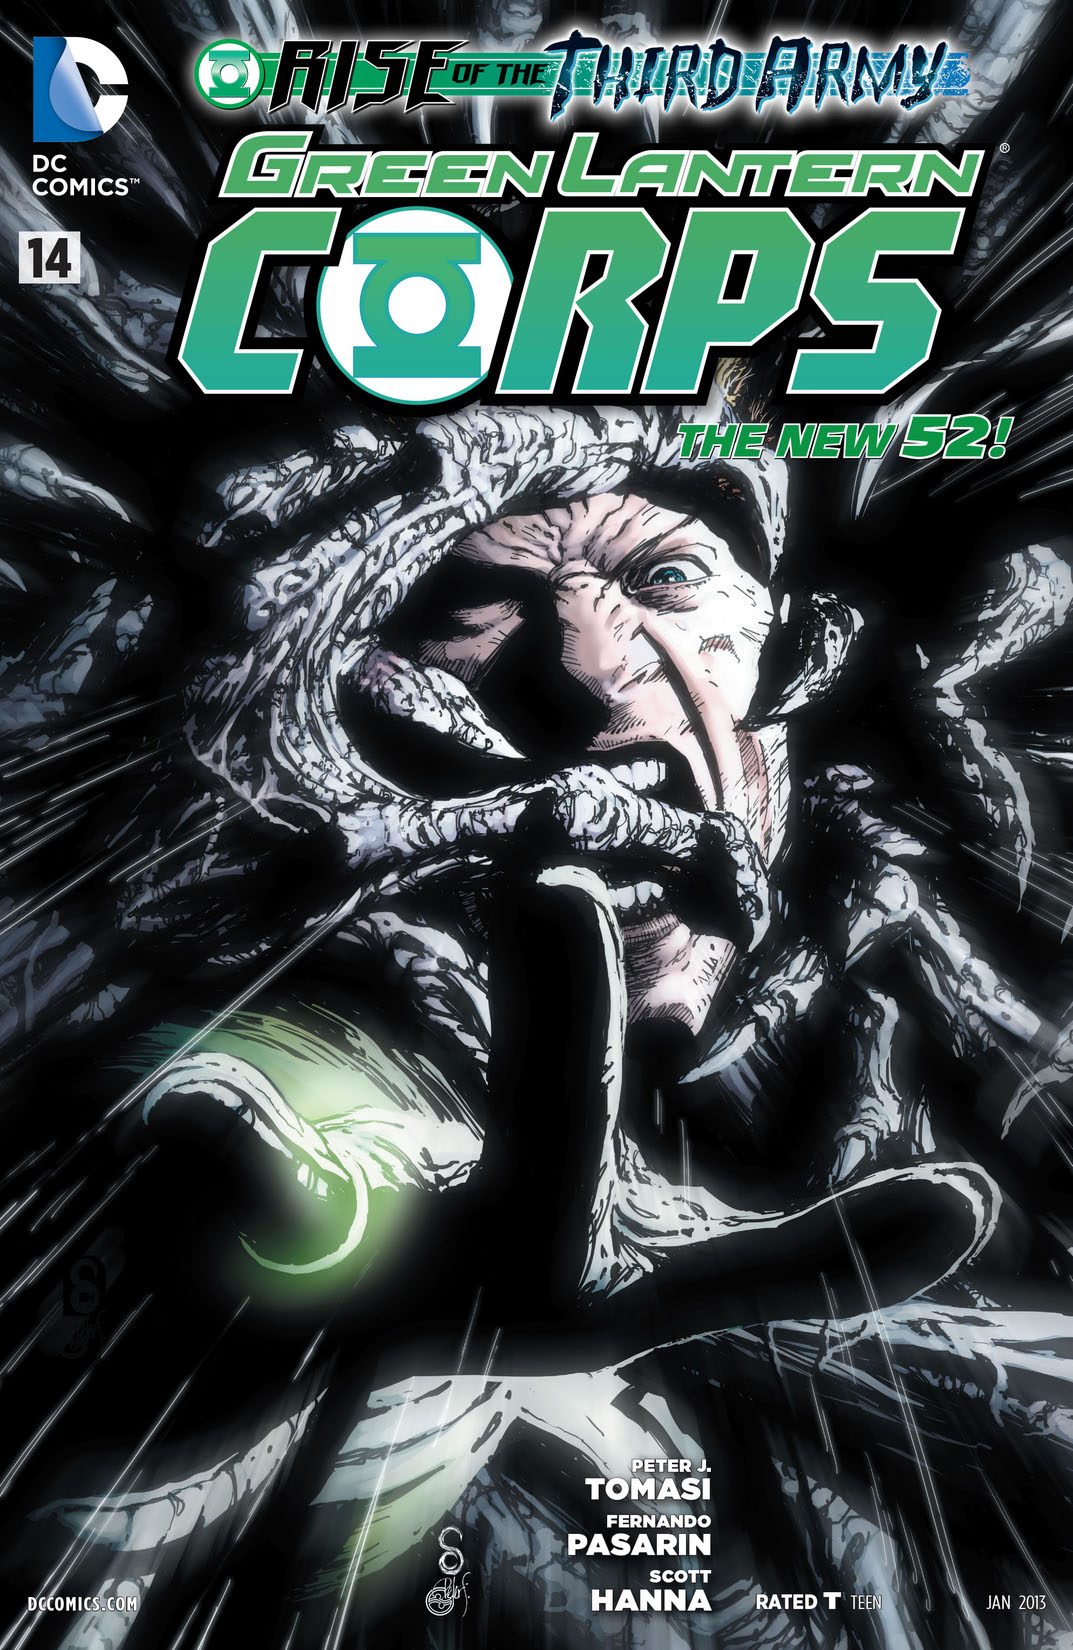 Green Lantern Corps (2011-) #14 preview images